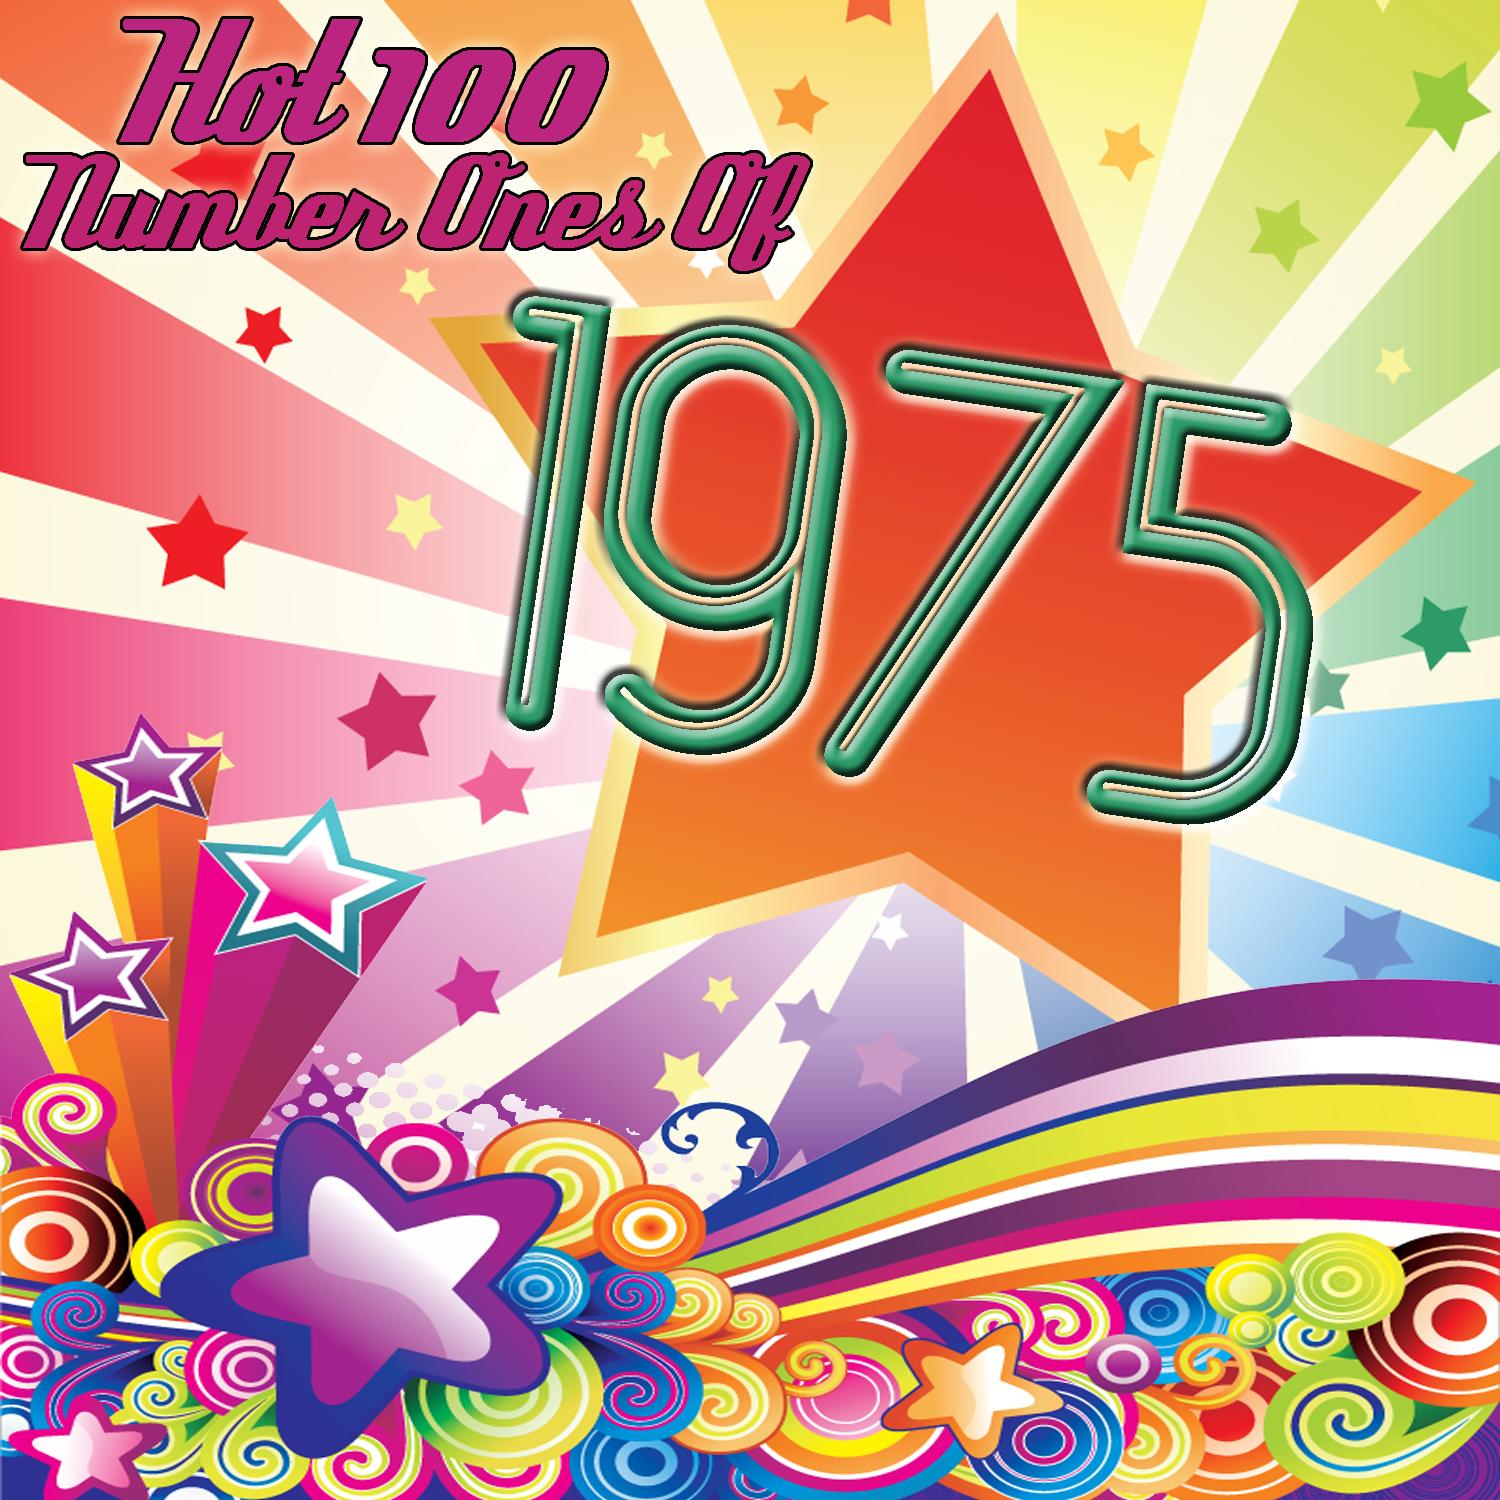 Hot 100 Number Ones Of 1975